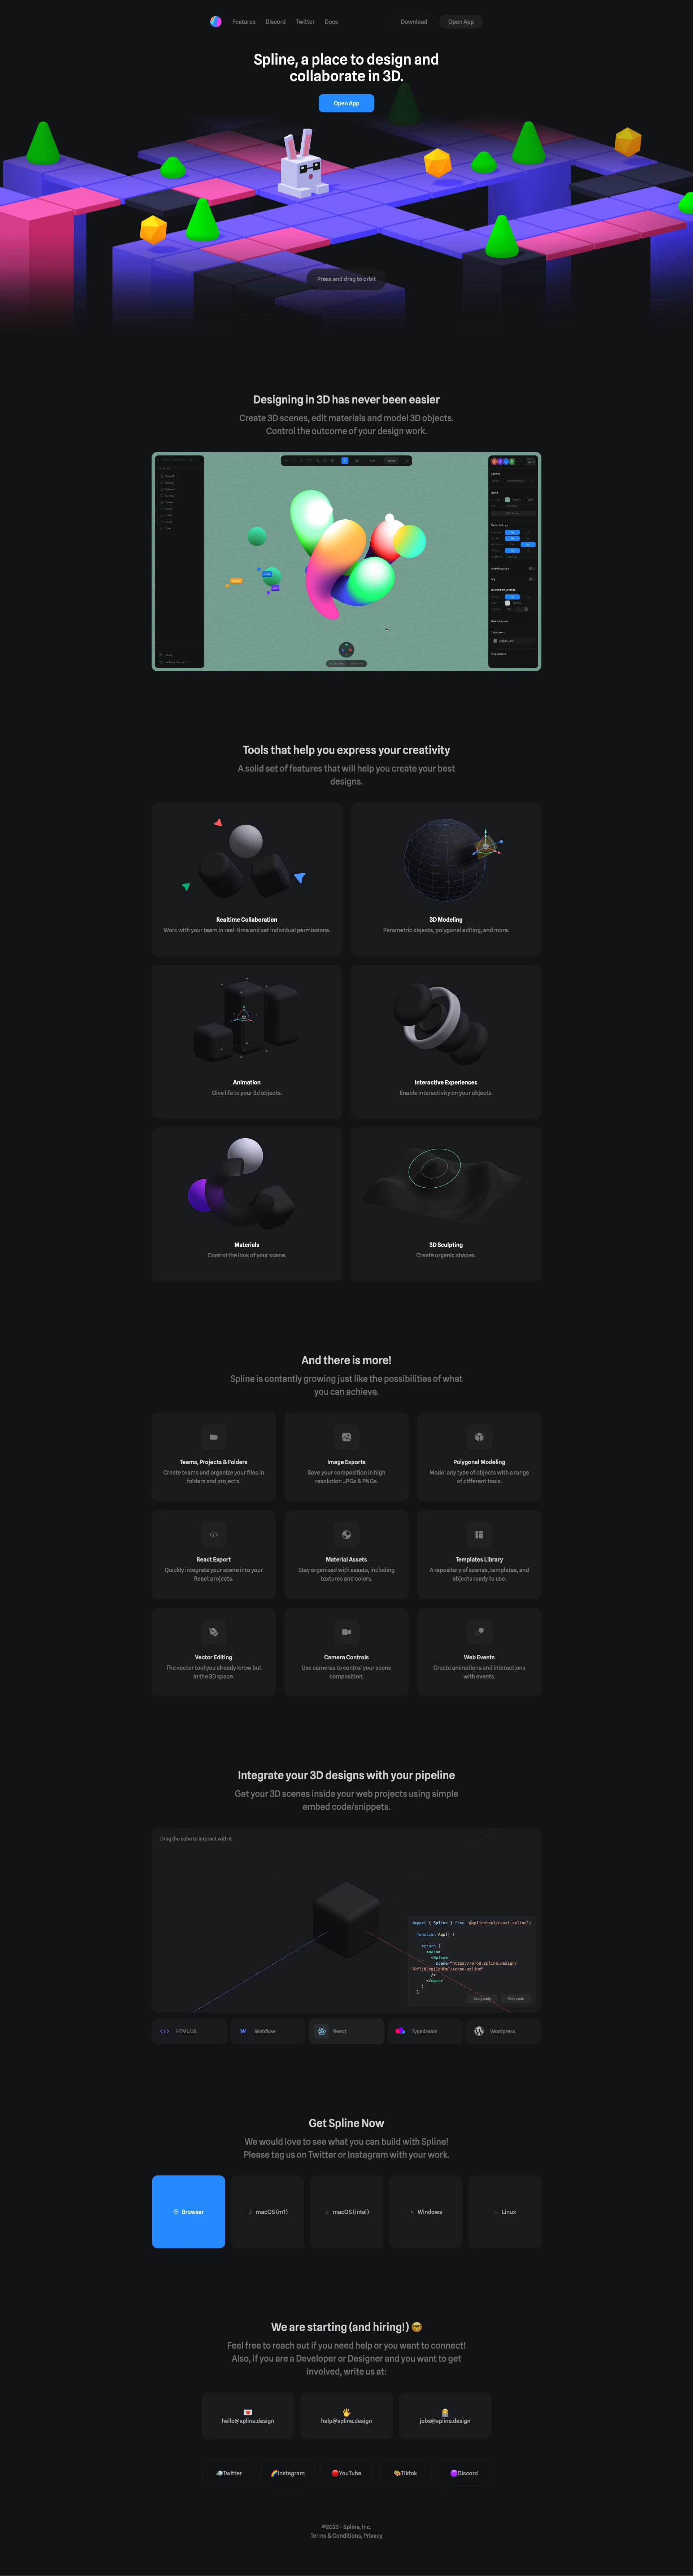 Spline Landing Page Example: Design tool for 3D web experiences. Designing in 3D has never been easier. Create 3D scenes, edit materials and model 3D objects. Control the outcome of your design work.